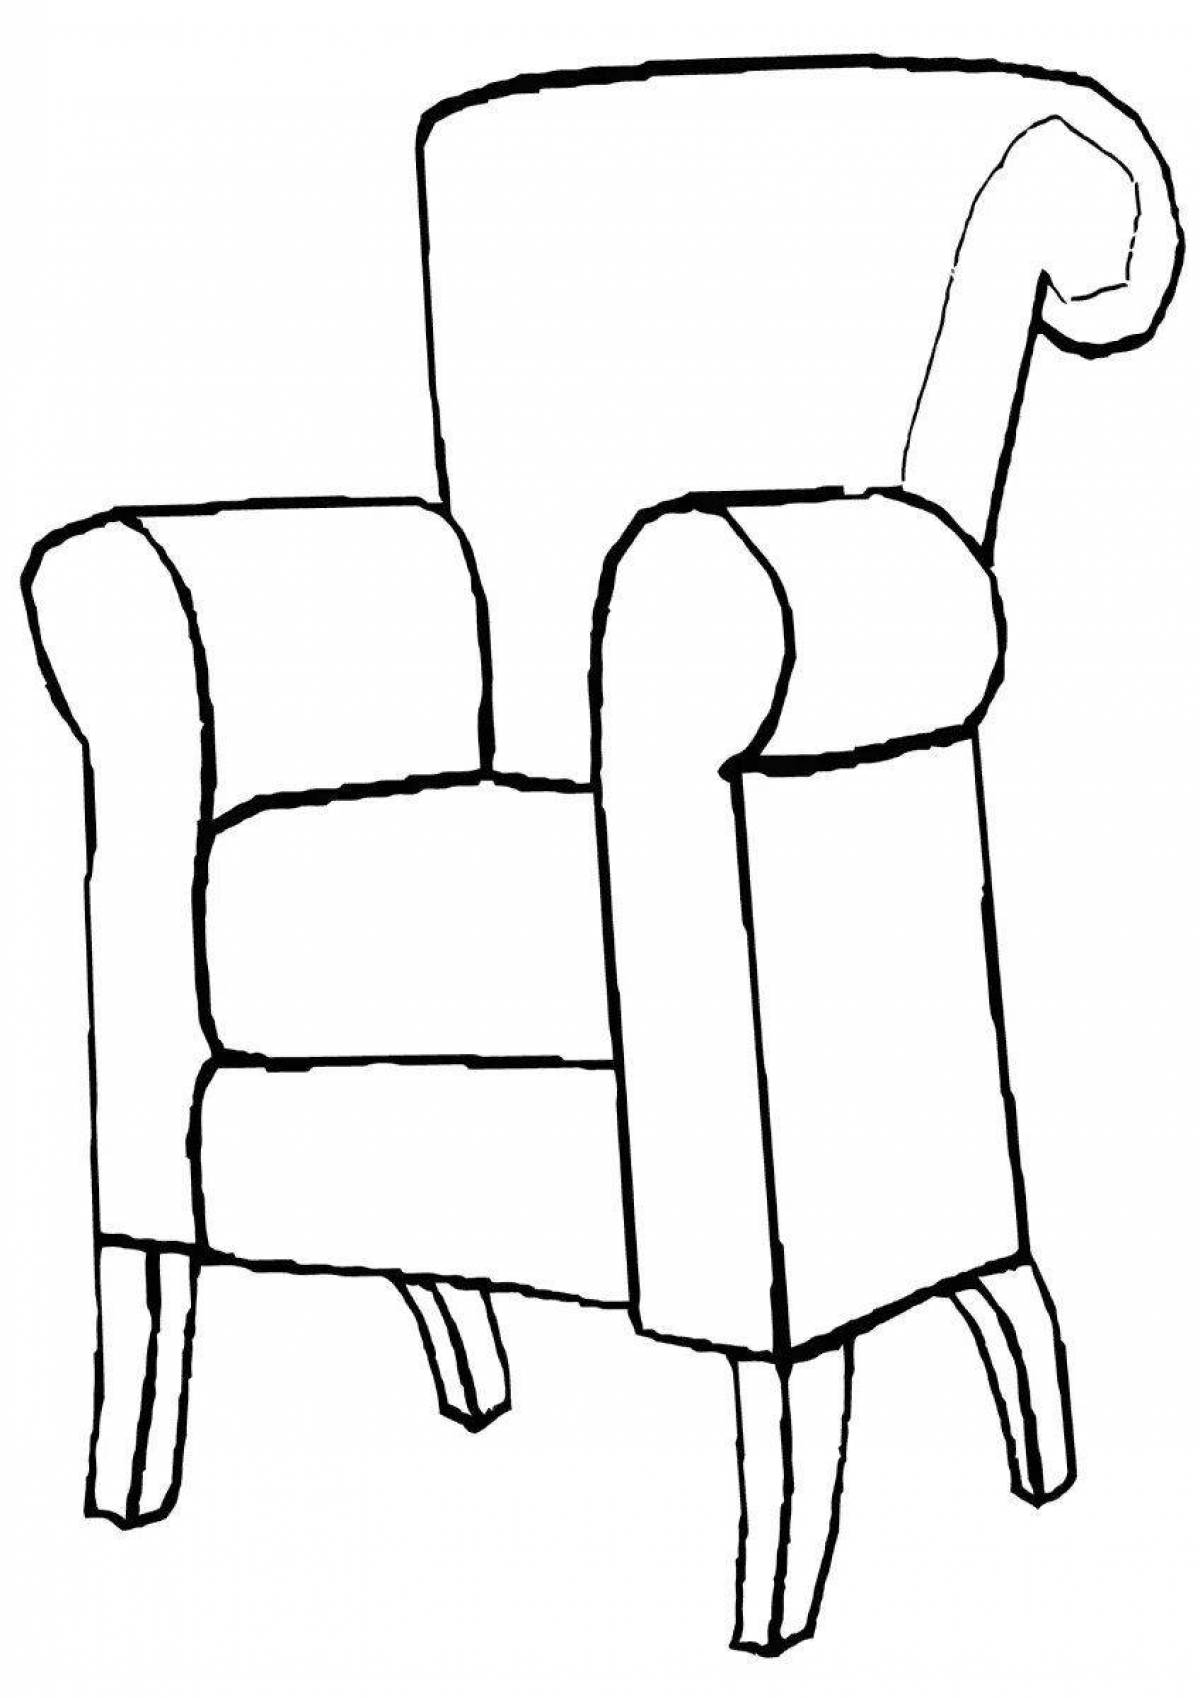 Coloring page charming sofa chair